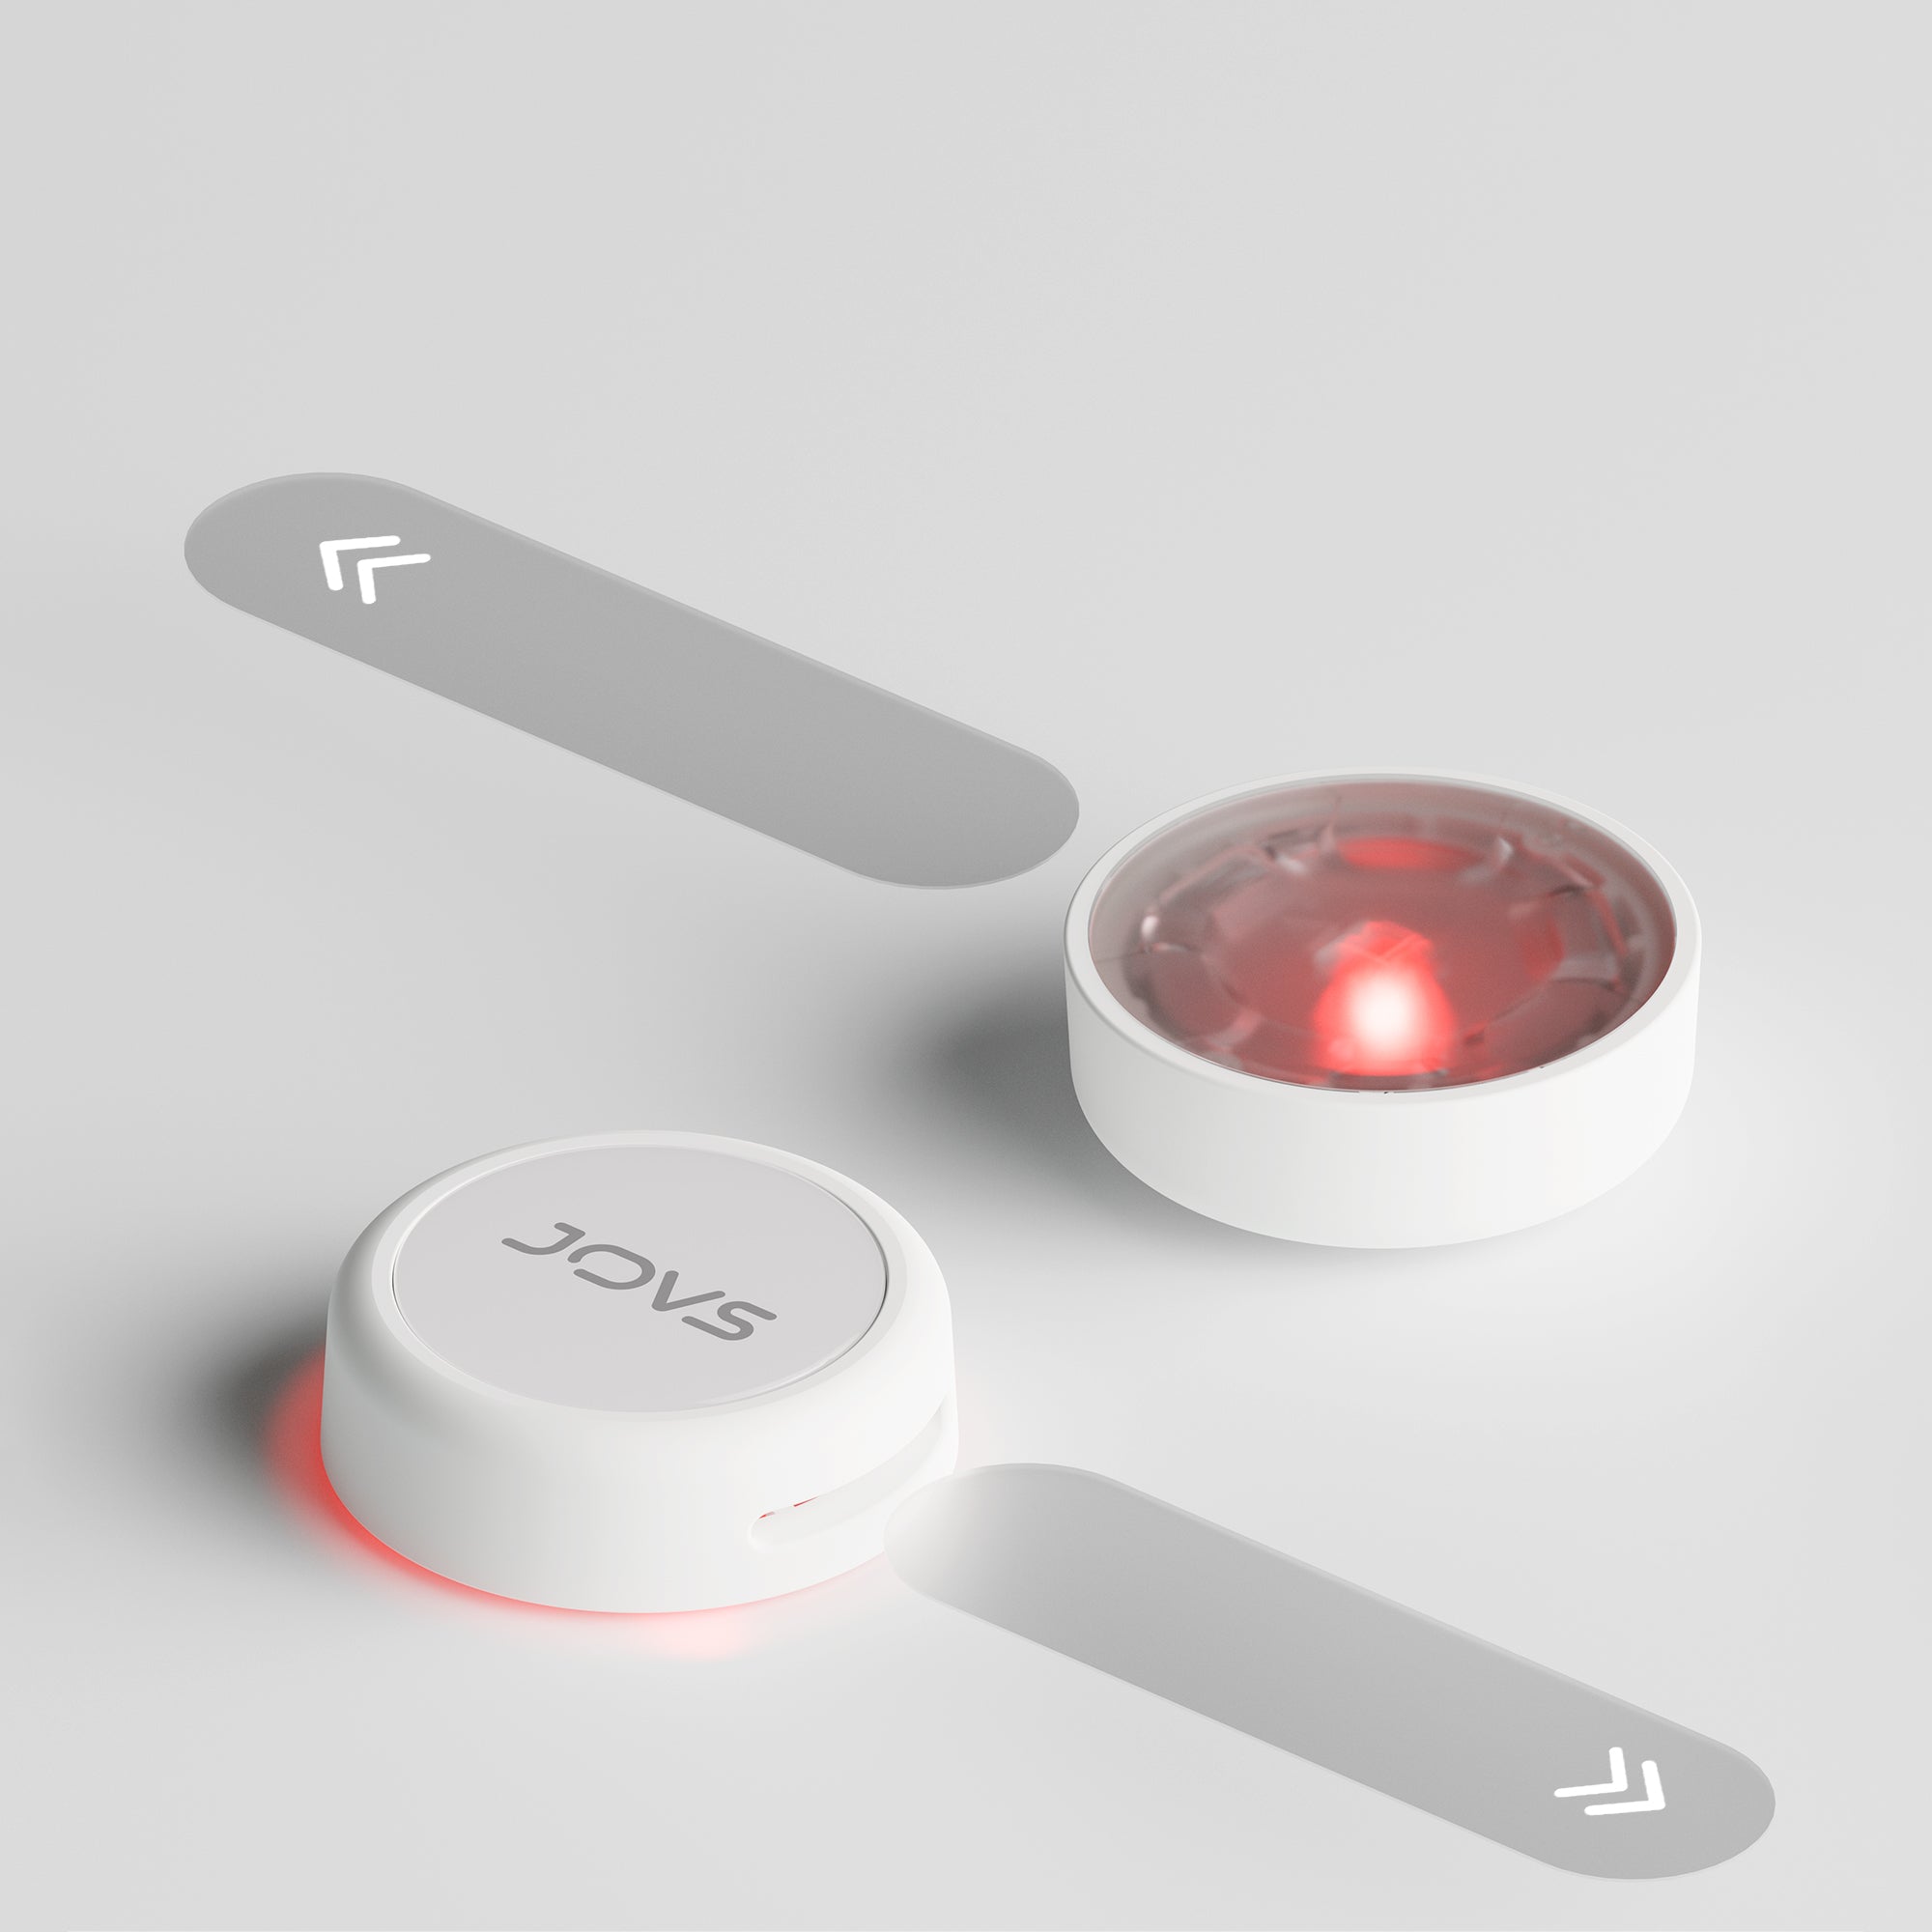 JOVS red light therapy for acne patch in action, providing phototherapy for skin.